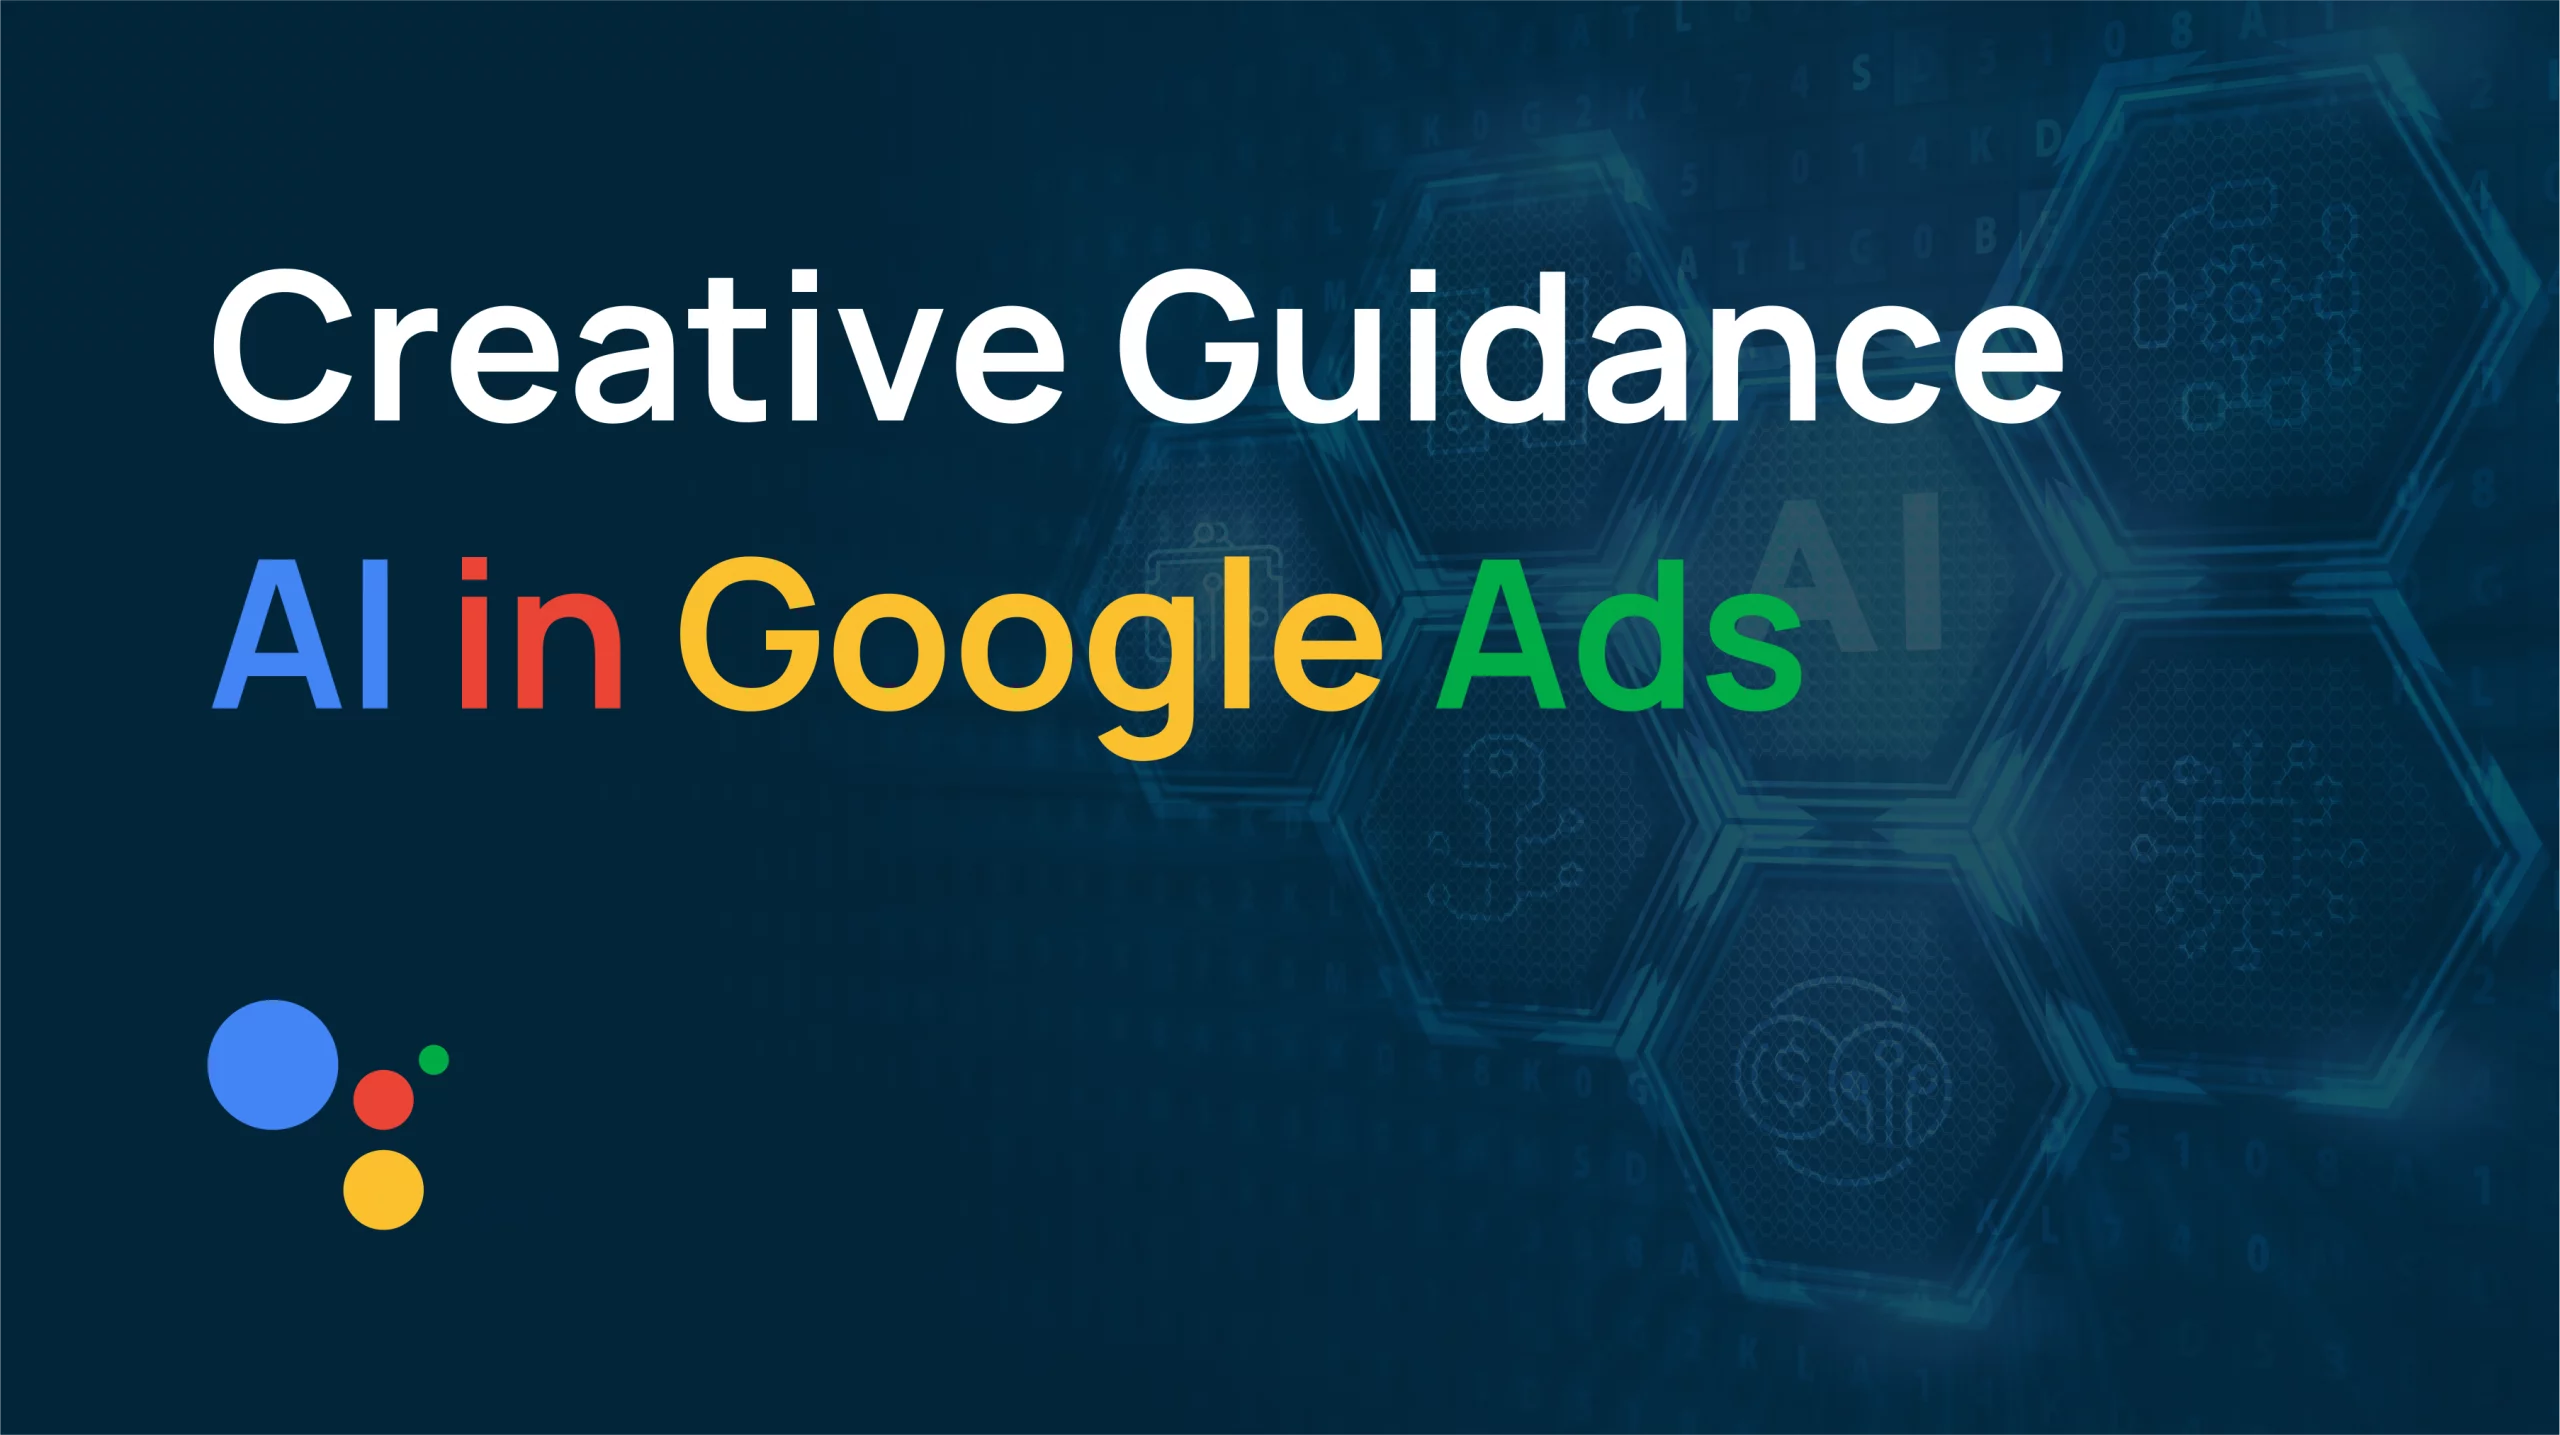 Creative Guidance is an AI tool launched by Google for YouTube ad optimization. It evaluates content, provides best-practice feedback, and notifies if your Google video ad lacks crucial information or key elements.